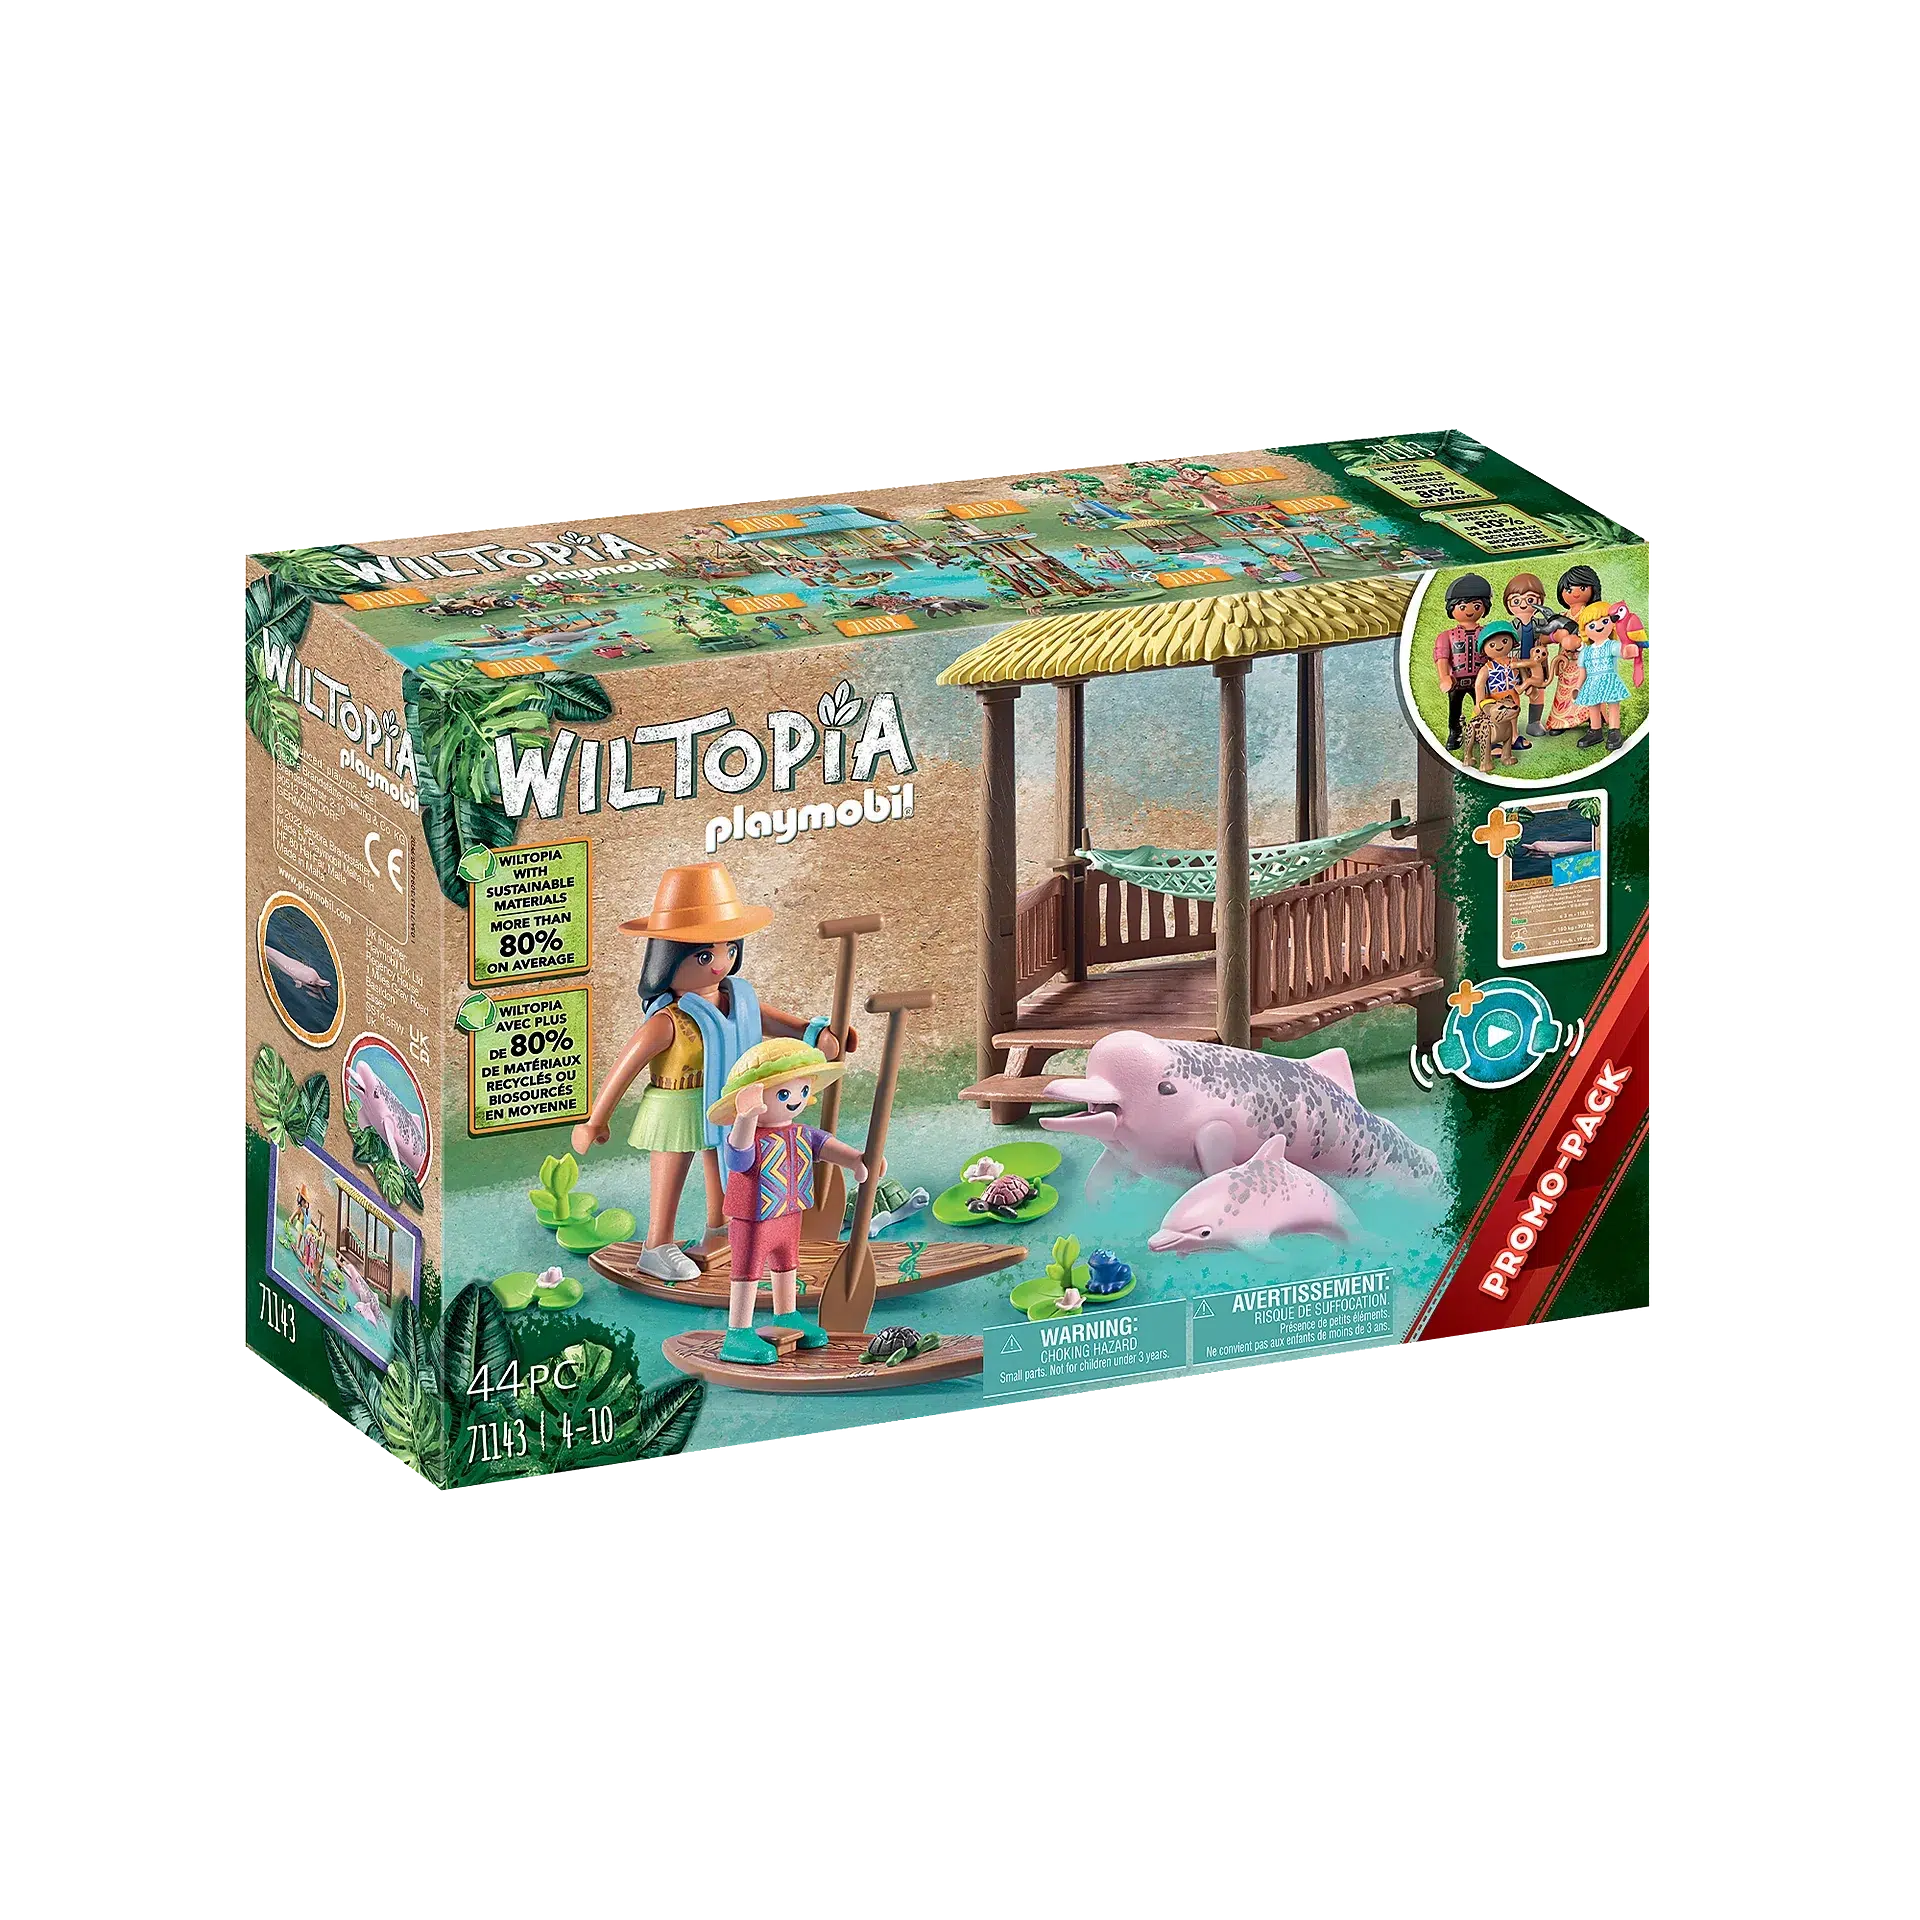 Playmobil-Wiltopia - Paddling Tour with River Dolphins-71143-Legacy Toys